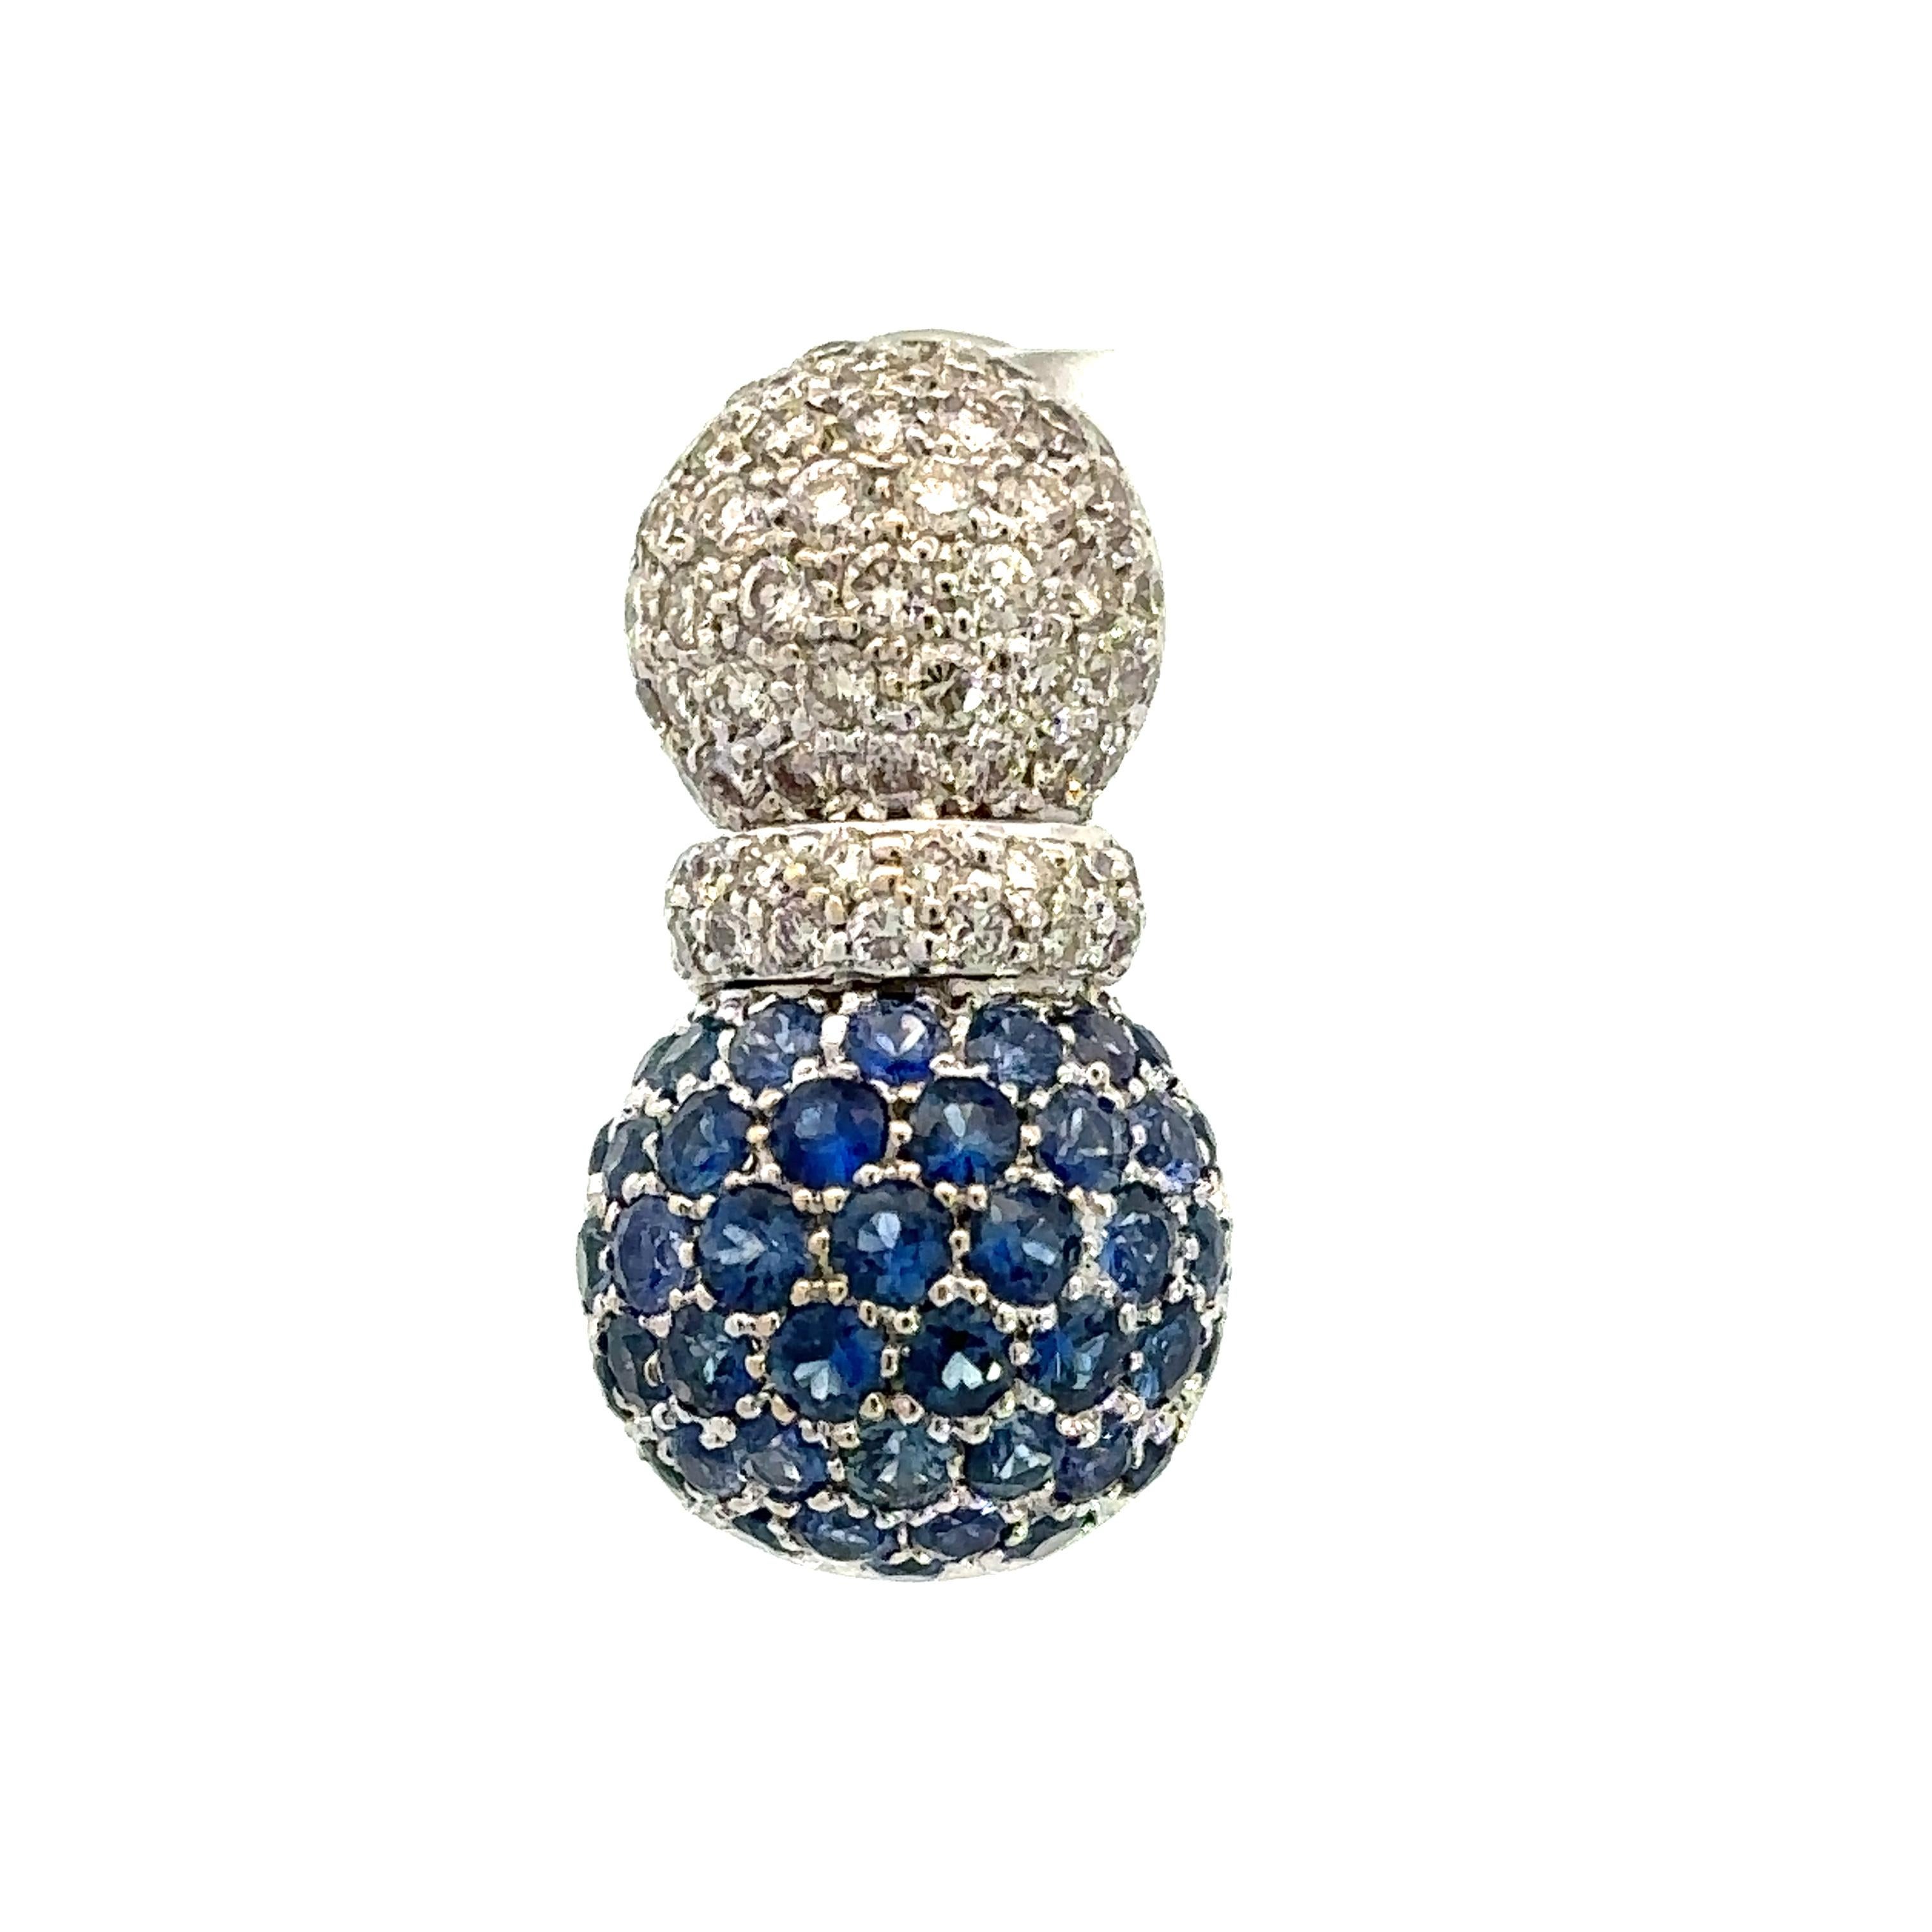 A pair of 18kt white gold Pineapple earrings set with natural blue sapphires and white diamonds with a beautiful open gallery motif, with a post and omega clip system.

84 natural blue sapphires 2.98ct total weighty

118 brilliant cut diamonds